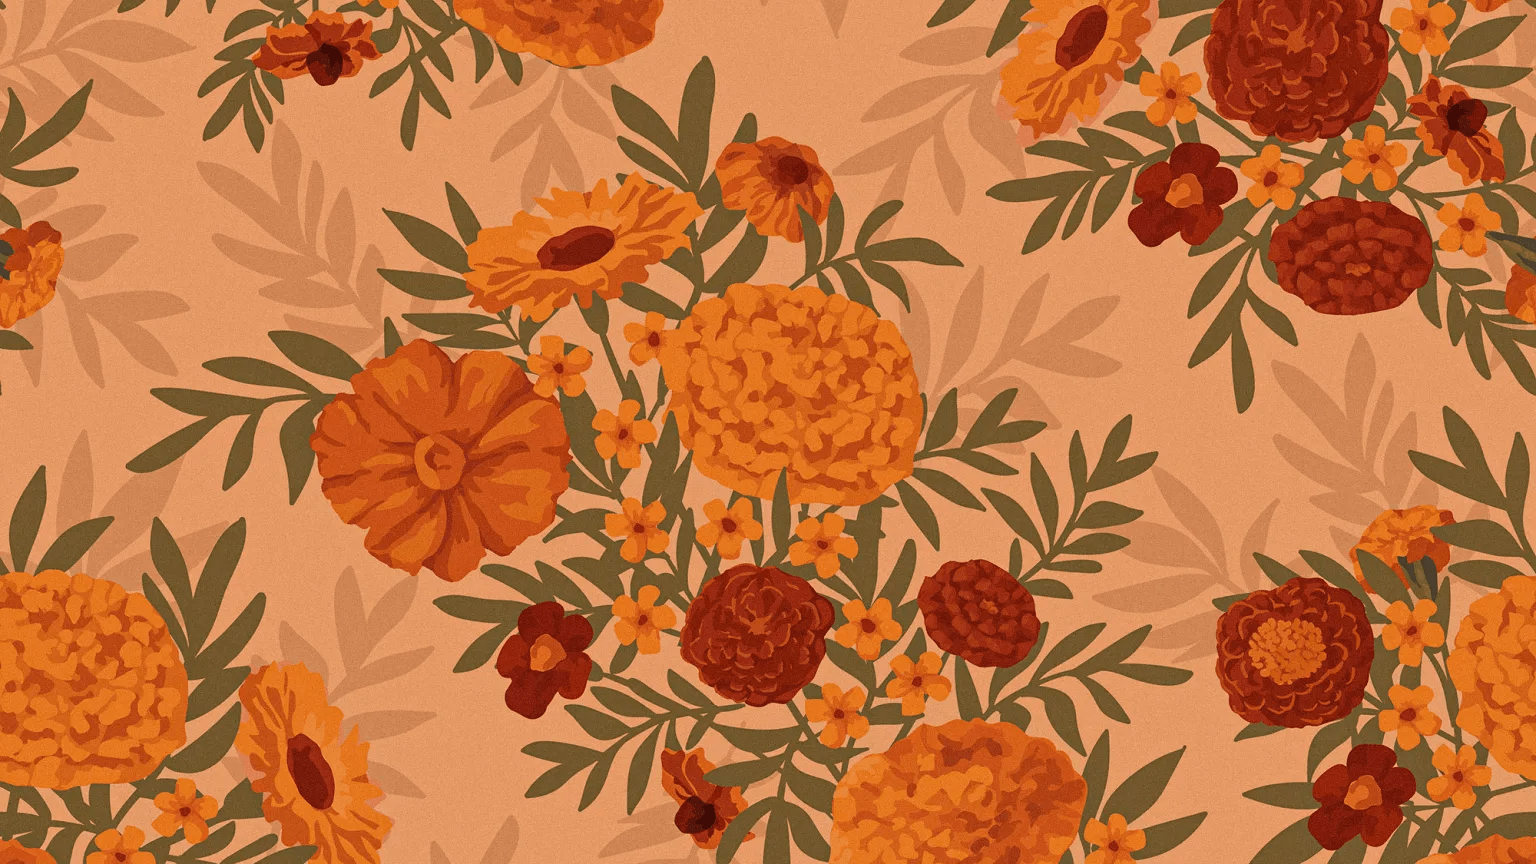 new Fall aesthetic desktop wallpaper for your computer or iPad ⋆ The Aesthetic Shop. Vintage desktop wallpaper, Desktop wallpaper fall, Cute fall wallpaper